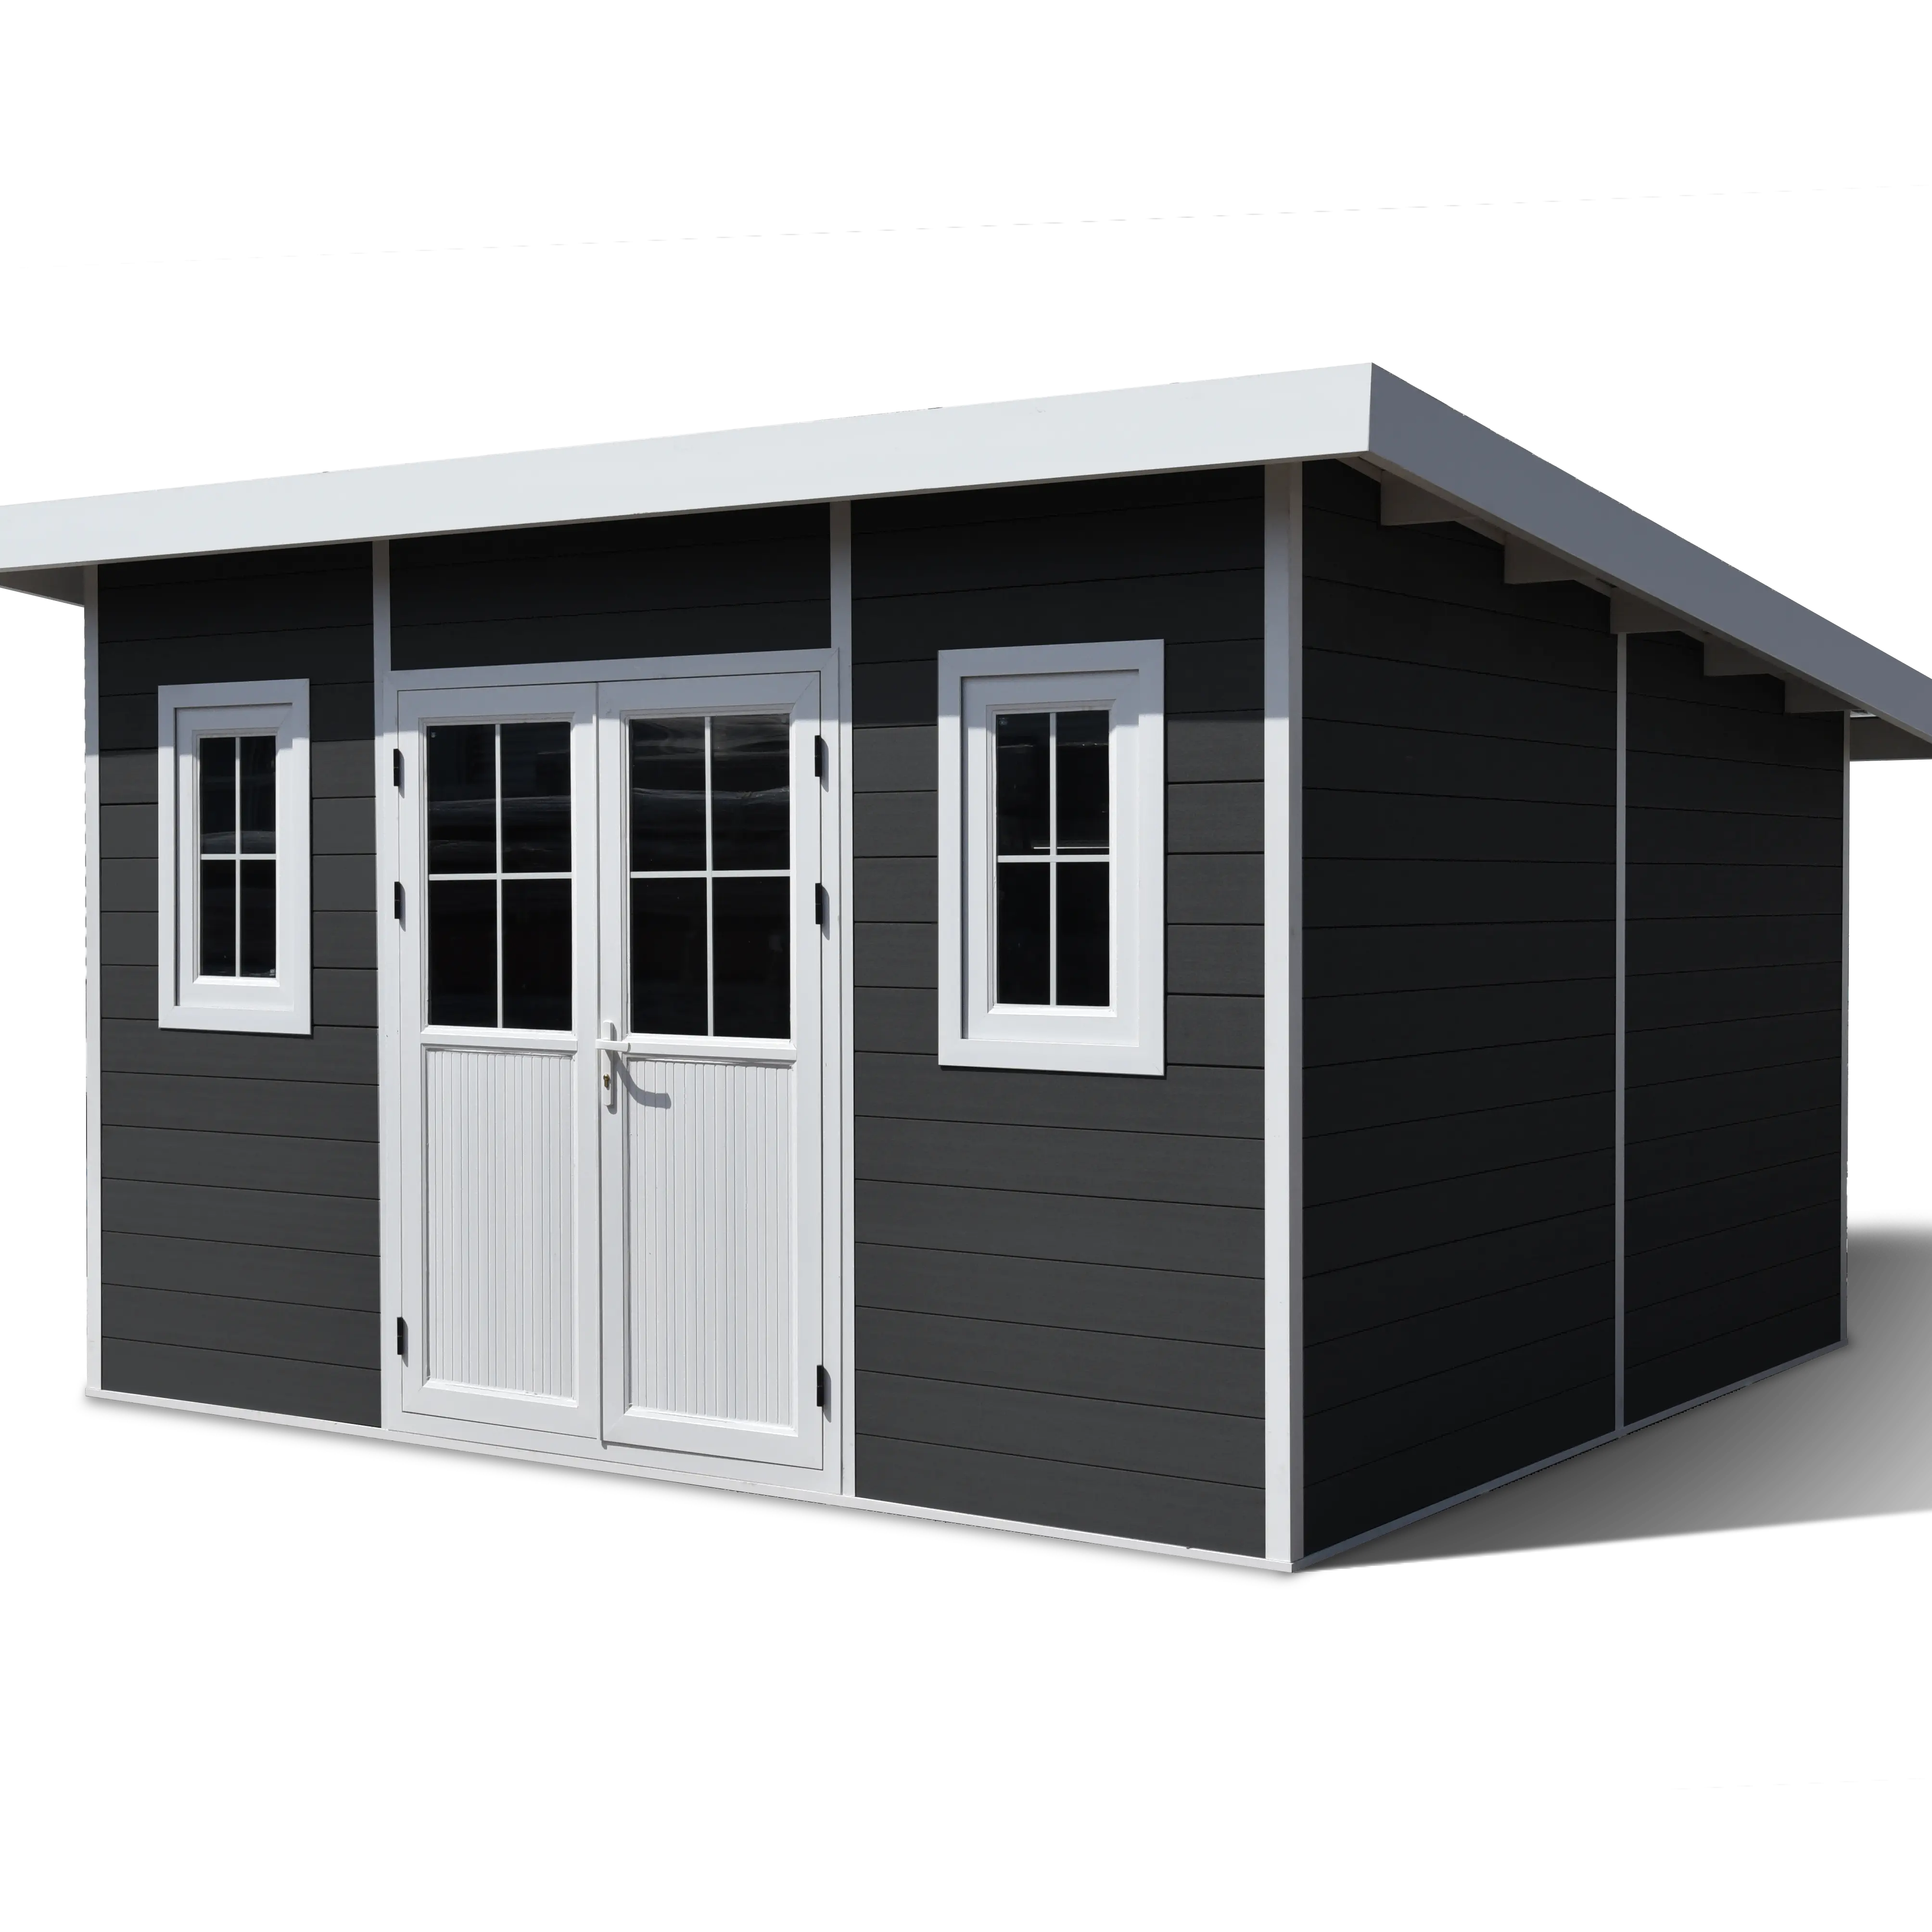 Easy installing outdoor China wood plastic composite wpc garden shed sheds storage outdoor